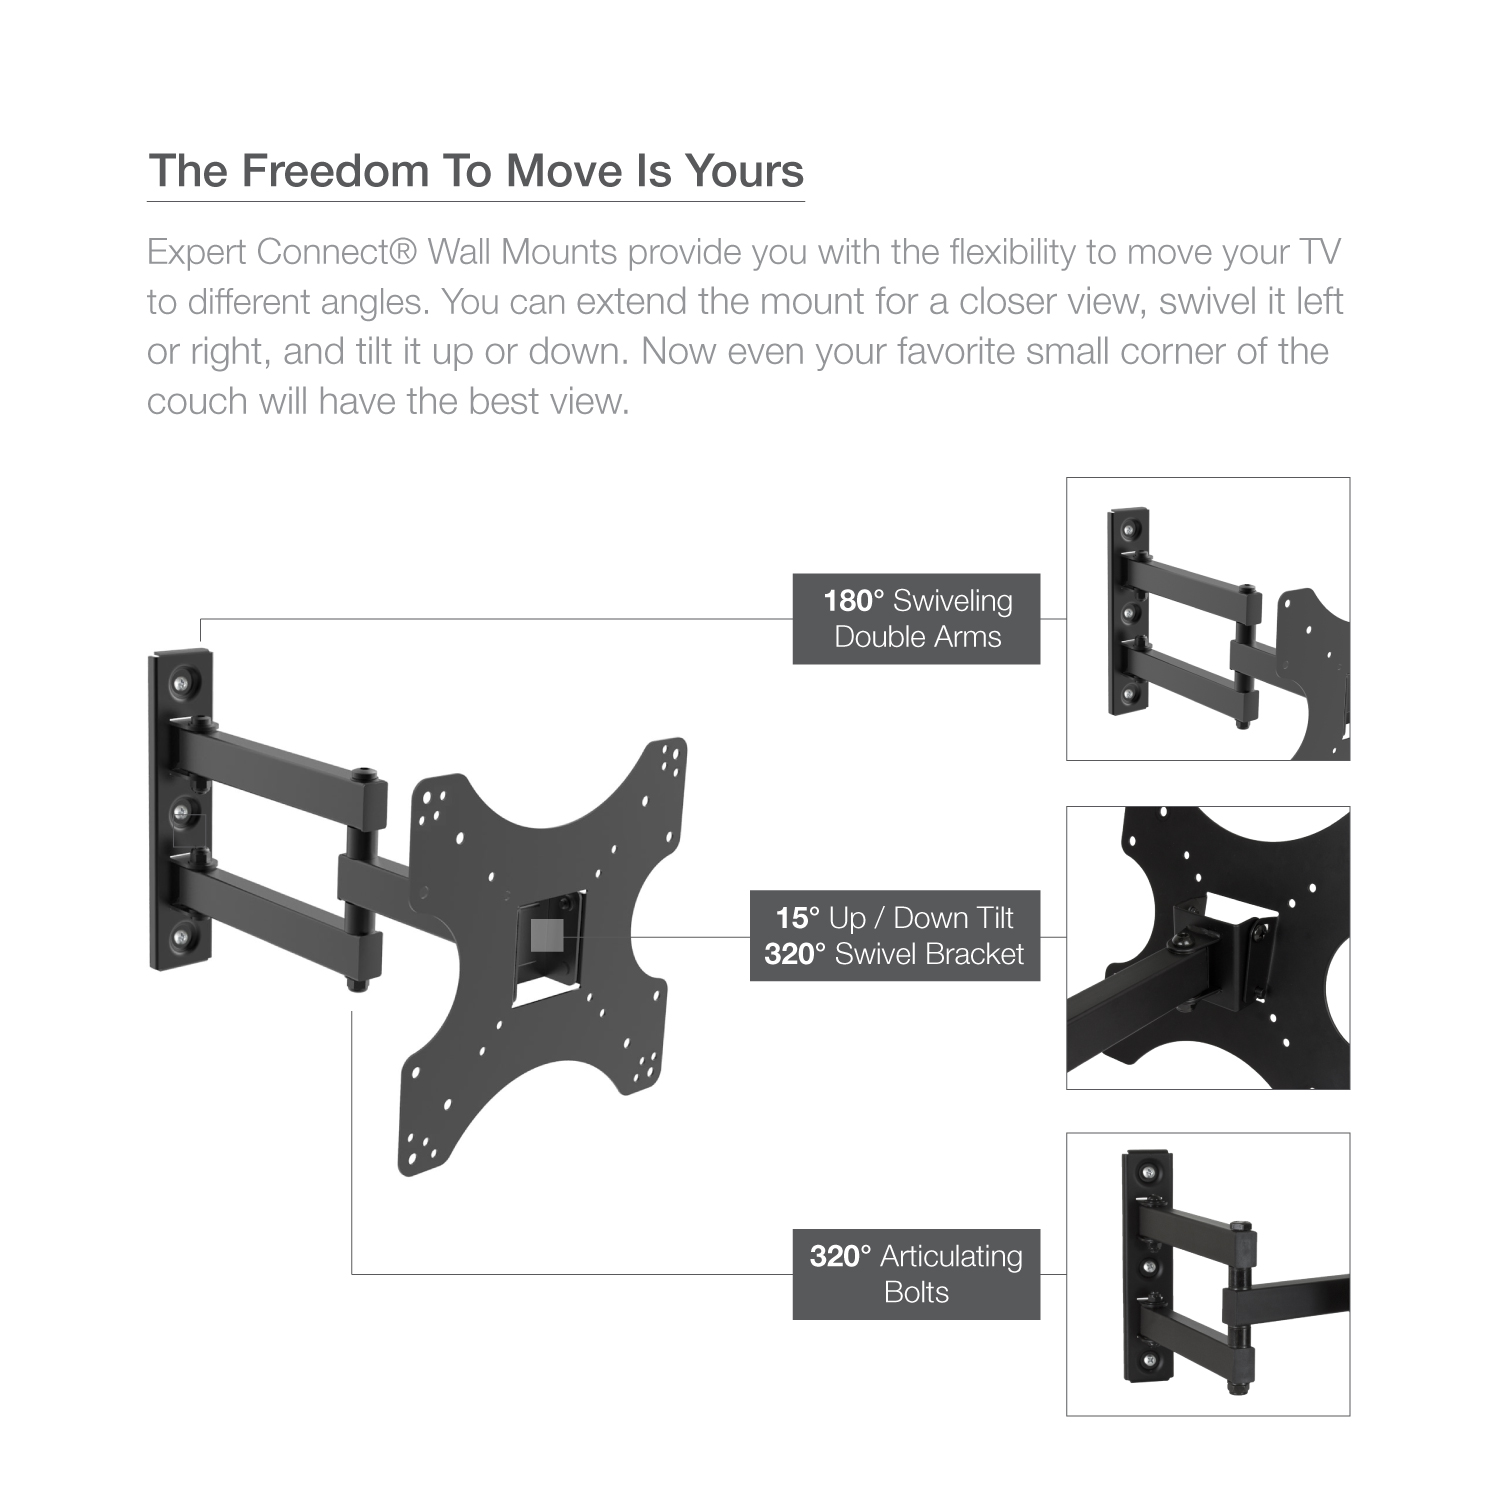 Expert Connect | TV Wall Mount Bracket | 17 - 42" | Full Motion Articulating | Tilt & Swivel & Rotation Adjustment | Max VESA 200x200mm | For LED, LCD, OLED and Flat Screen TVs Up to 50 lbs - image 3 of 4